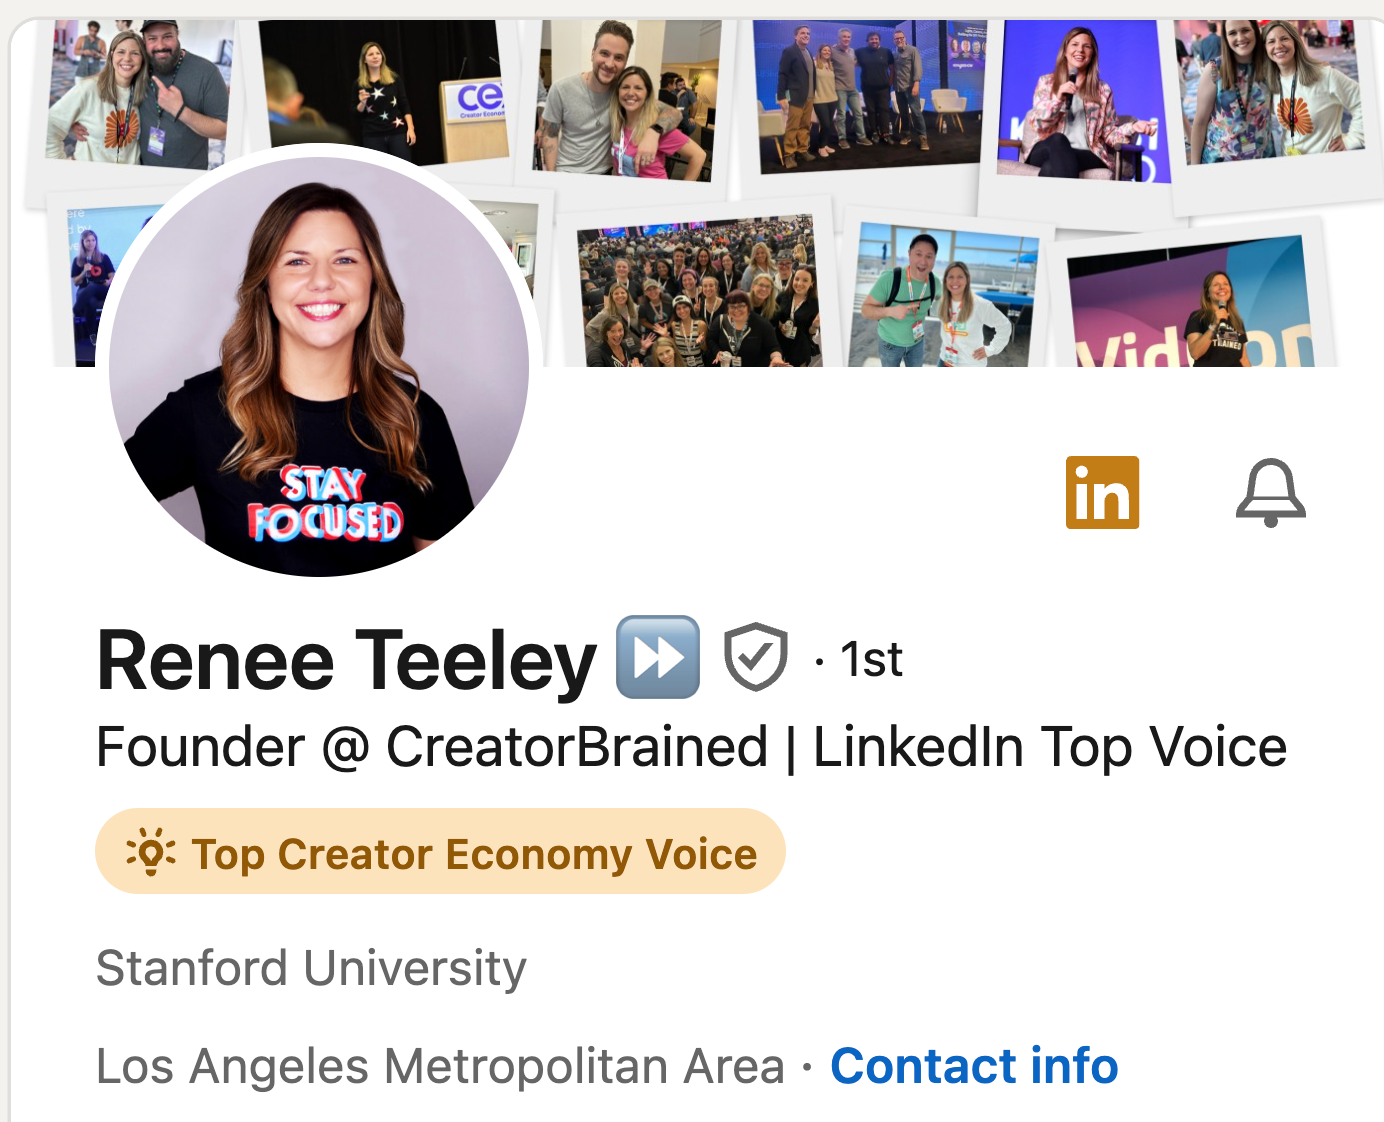 If you're not at a senior level but have enough expertise in a certain industry, LinkedIn also has a gold Community Top Voice Badge available to members. These badges "recognize noteworthy contributors who share their expertise and experience in a specific skill or skills through contributions to collaborative articles." You can earn yourself a Community Top Voice badge if you're nominated by other members if they believe you bring value to the platform with your contributors to collaborative articles. You will usually be in the top 5% of contributors and one of the first 2,500 badge holders for a particular skill. You can also earn multiple badges for different skills. 2